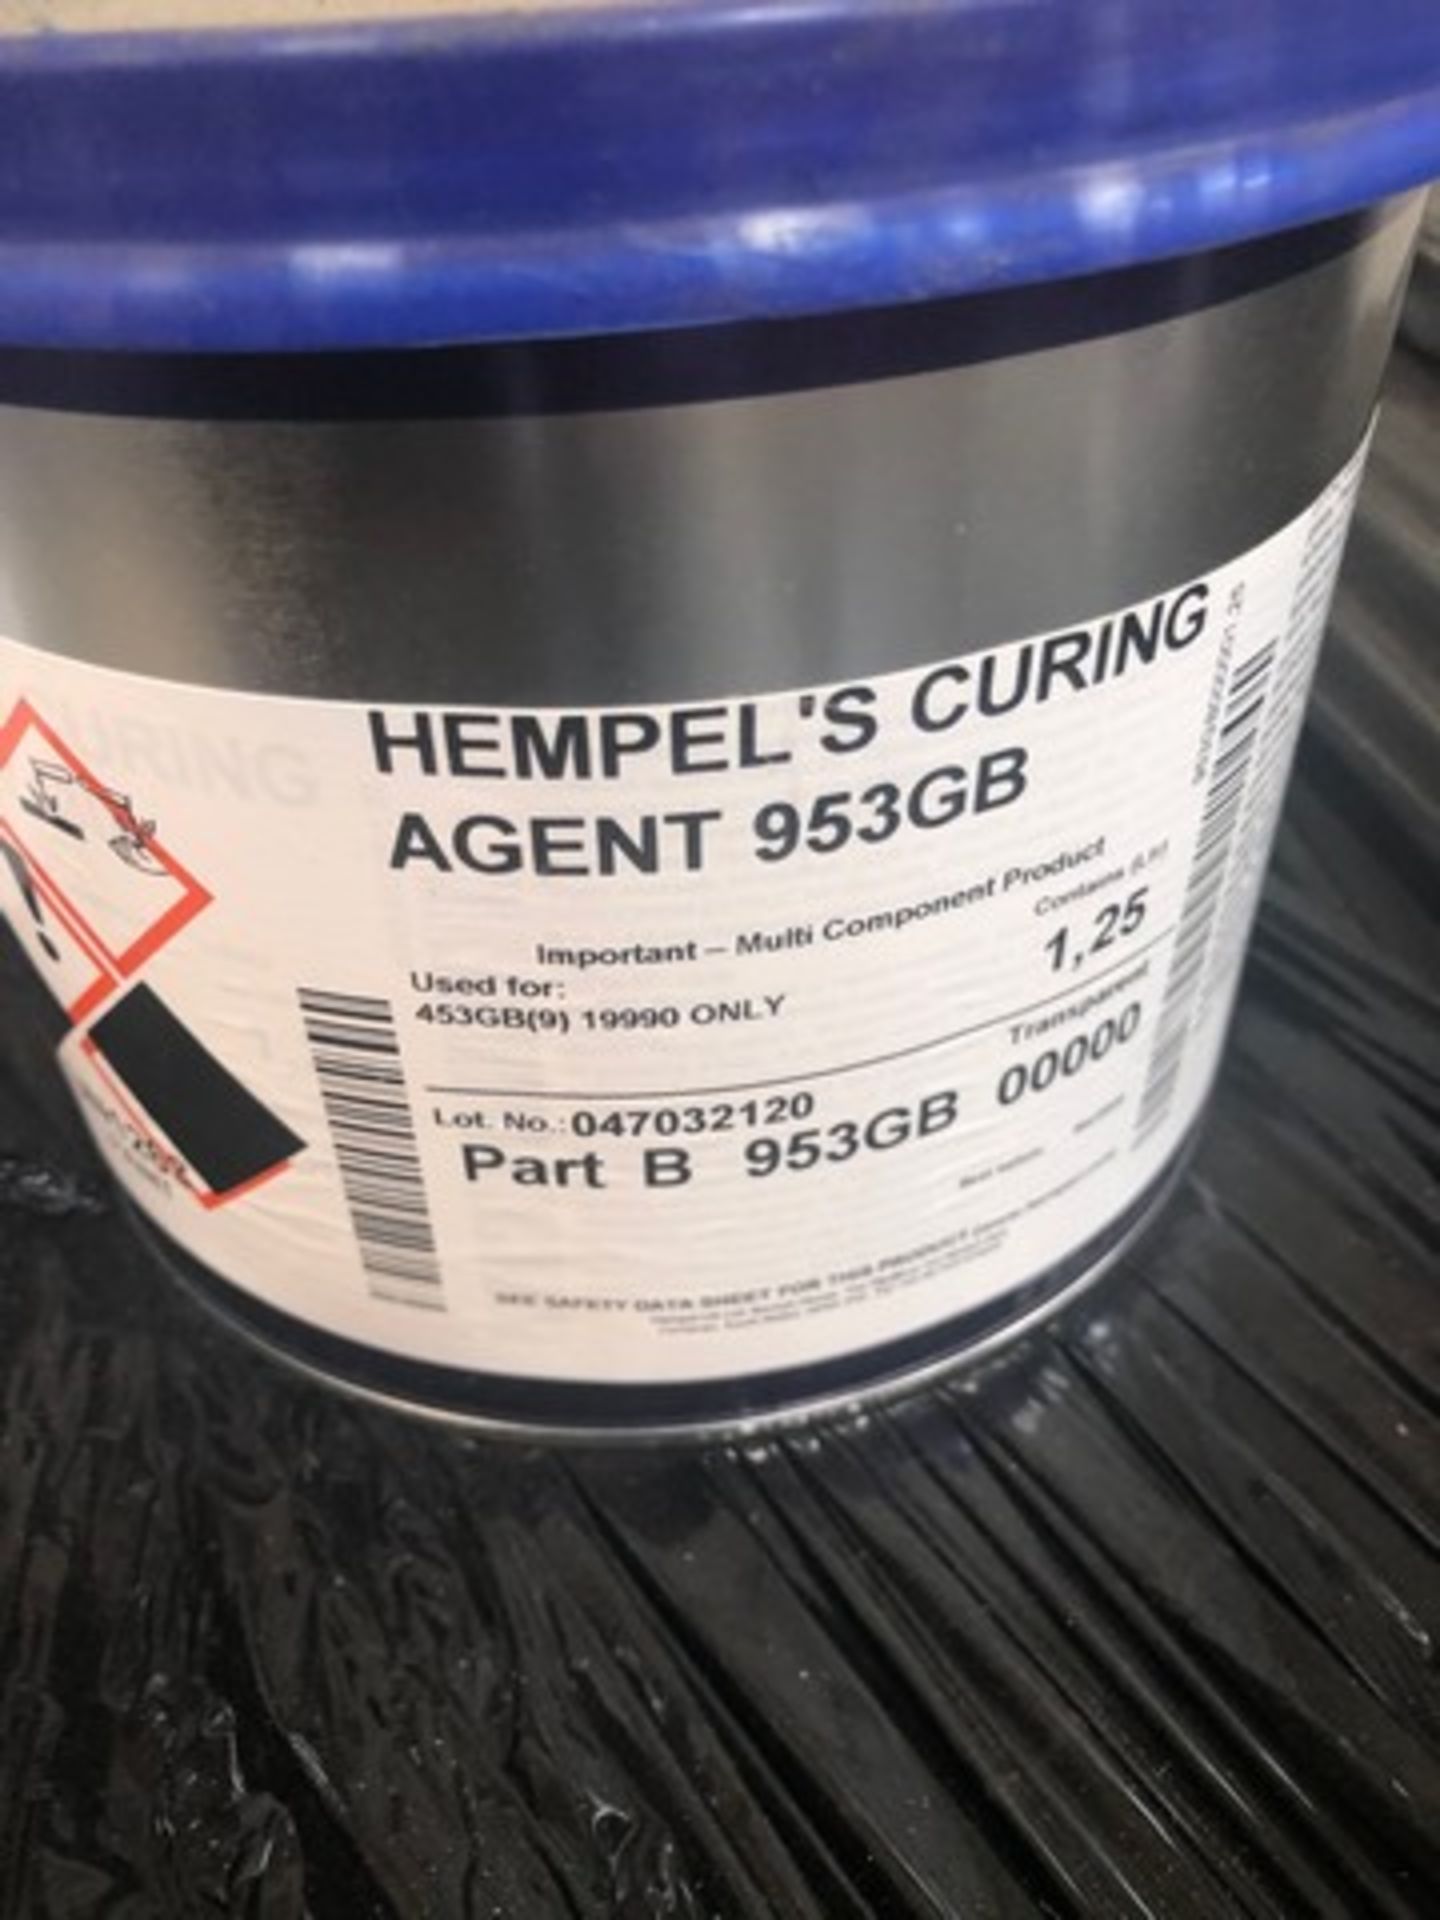 Mixed pallet of Hempel curing agent 953GB / 976GB, Hmepel N.S (no aggregate) 457GA approx total 30 t - Image 4 of 4